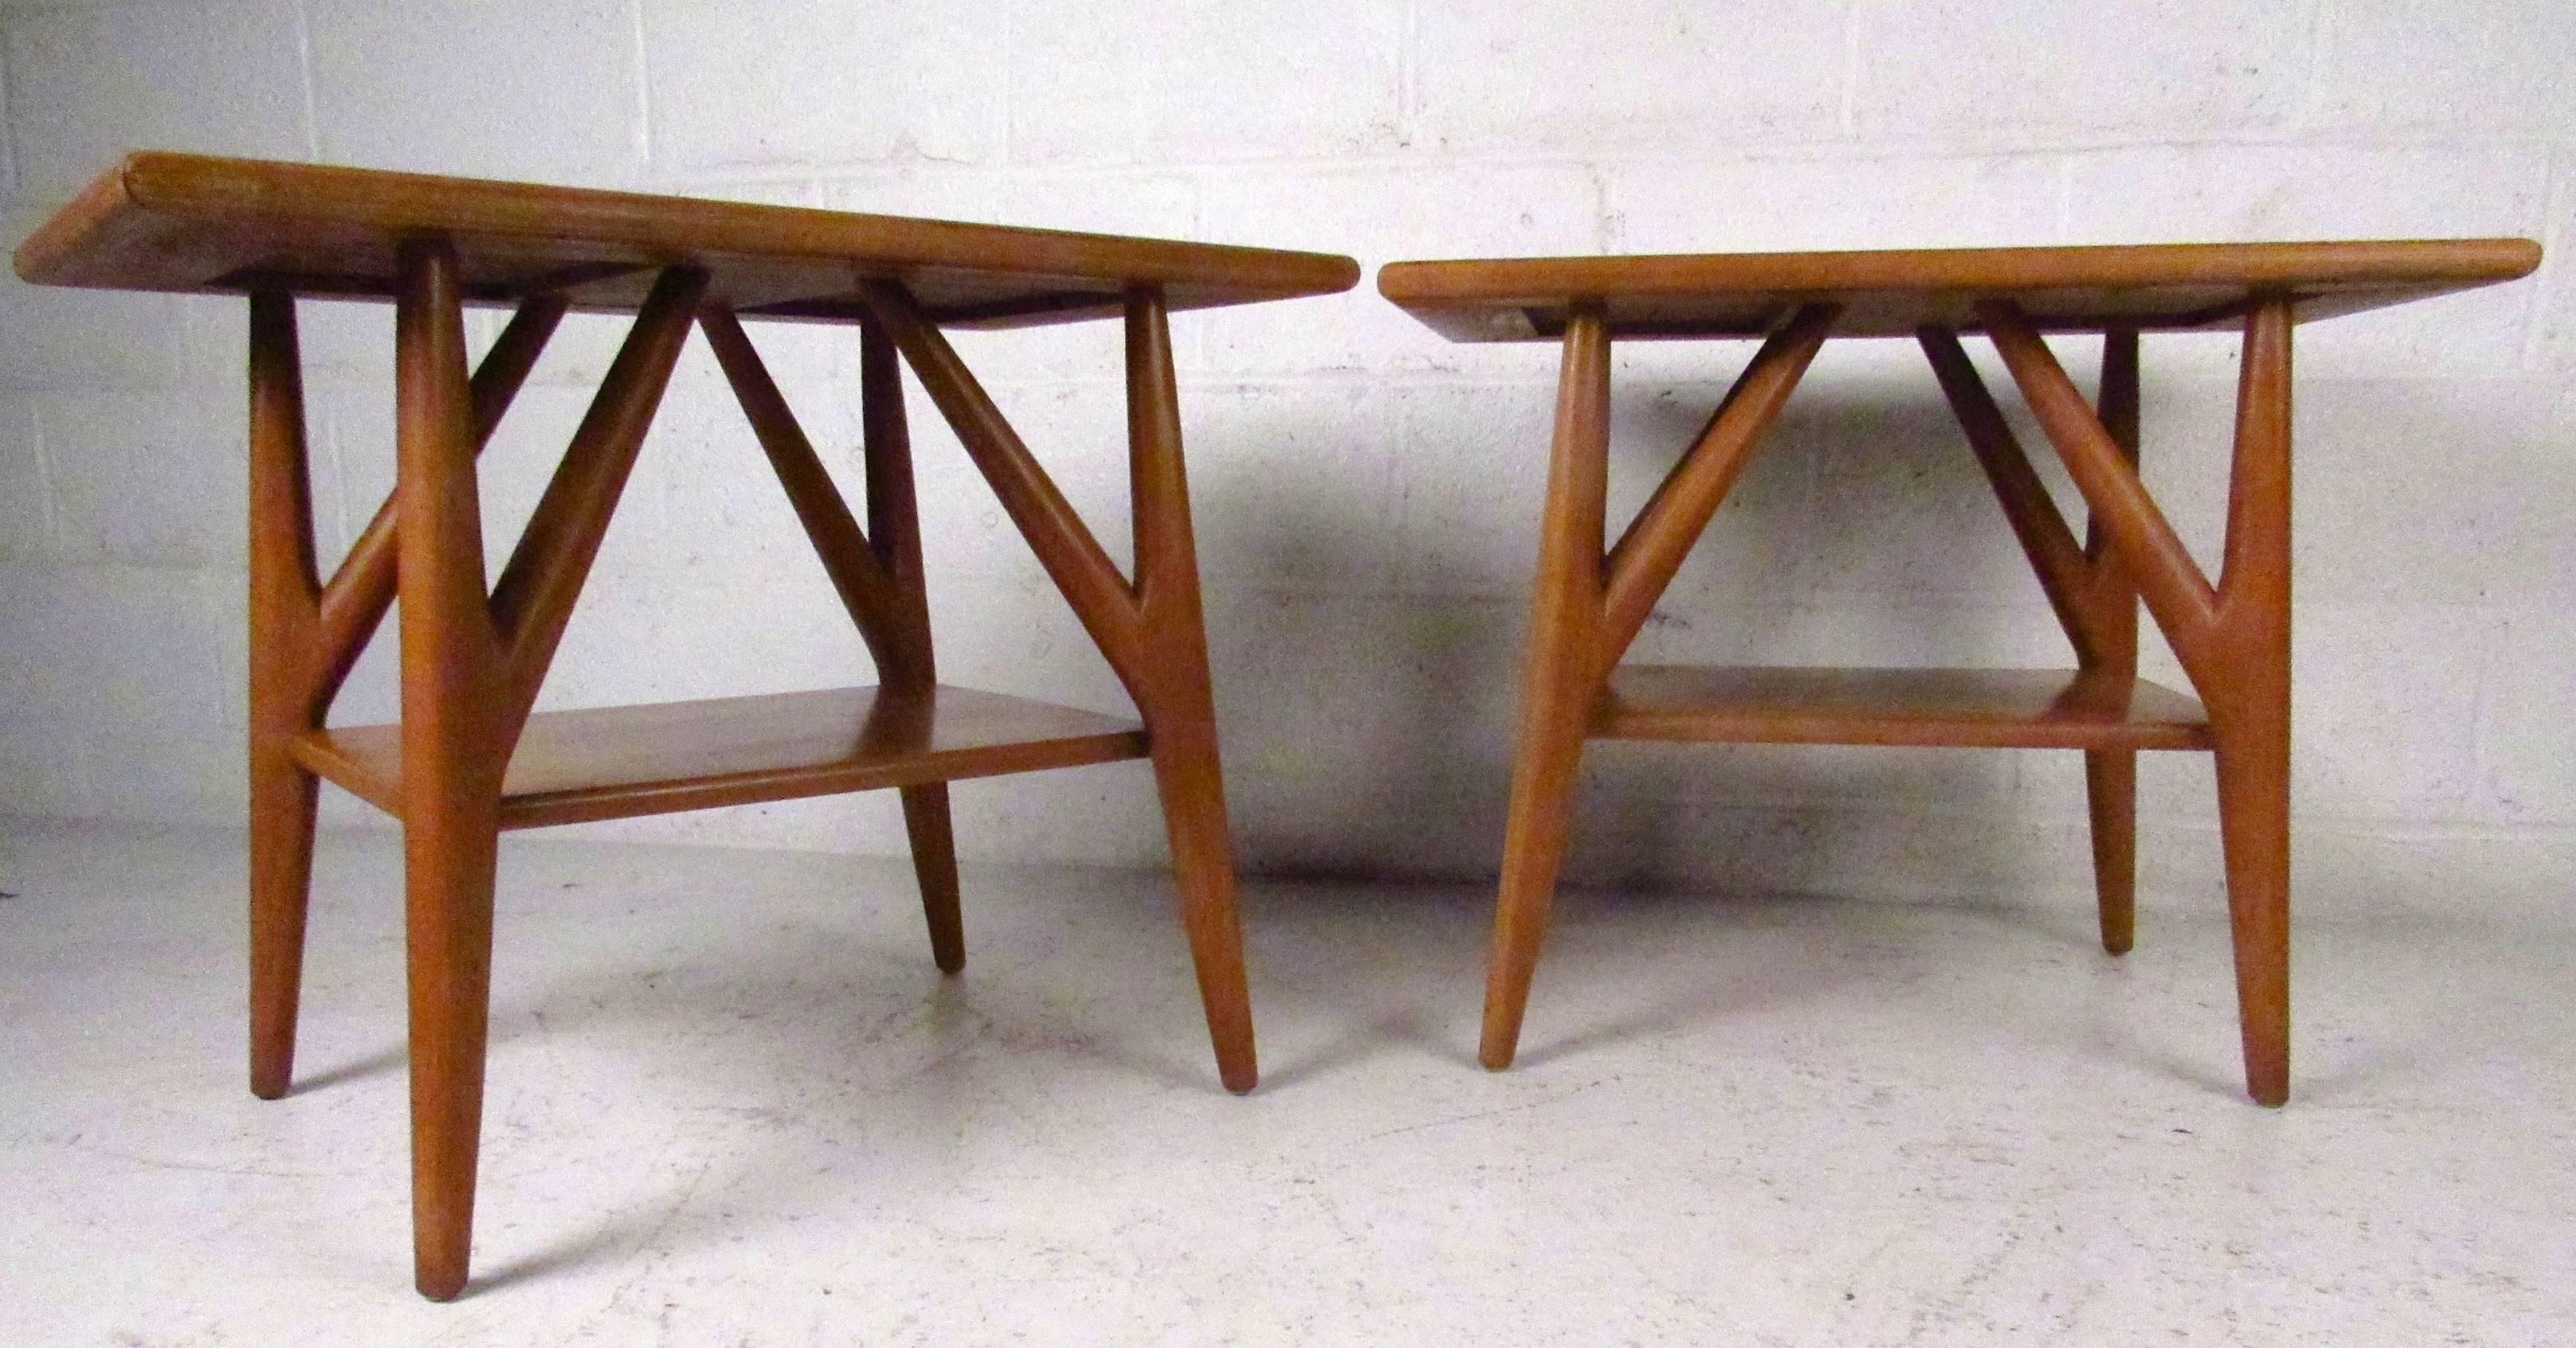 High designed tables made by Jamestown Lounge Company featuring sculpted oak frames and grass cloth tops. Reminiscent of Kagan's distinctly formed furniture.

(Please confirm item location - NY or NJ - with dealer).
 